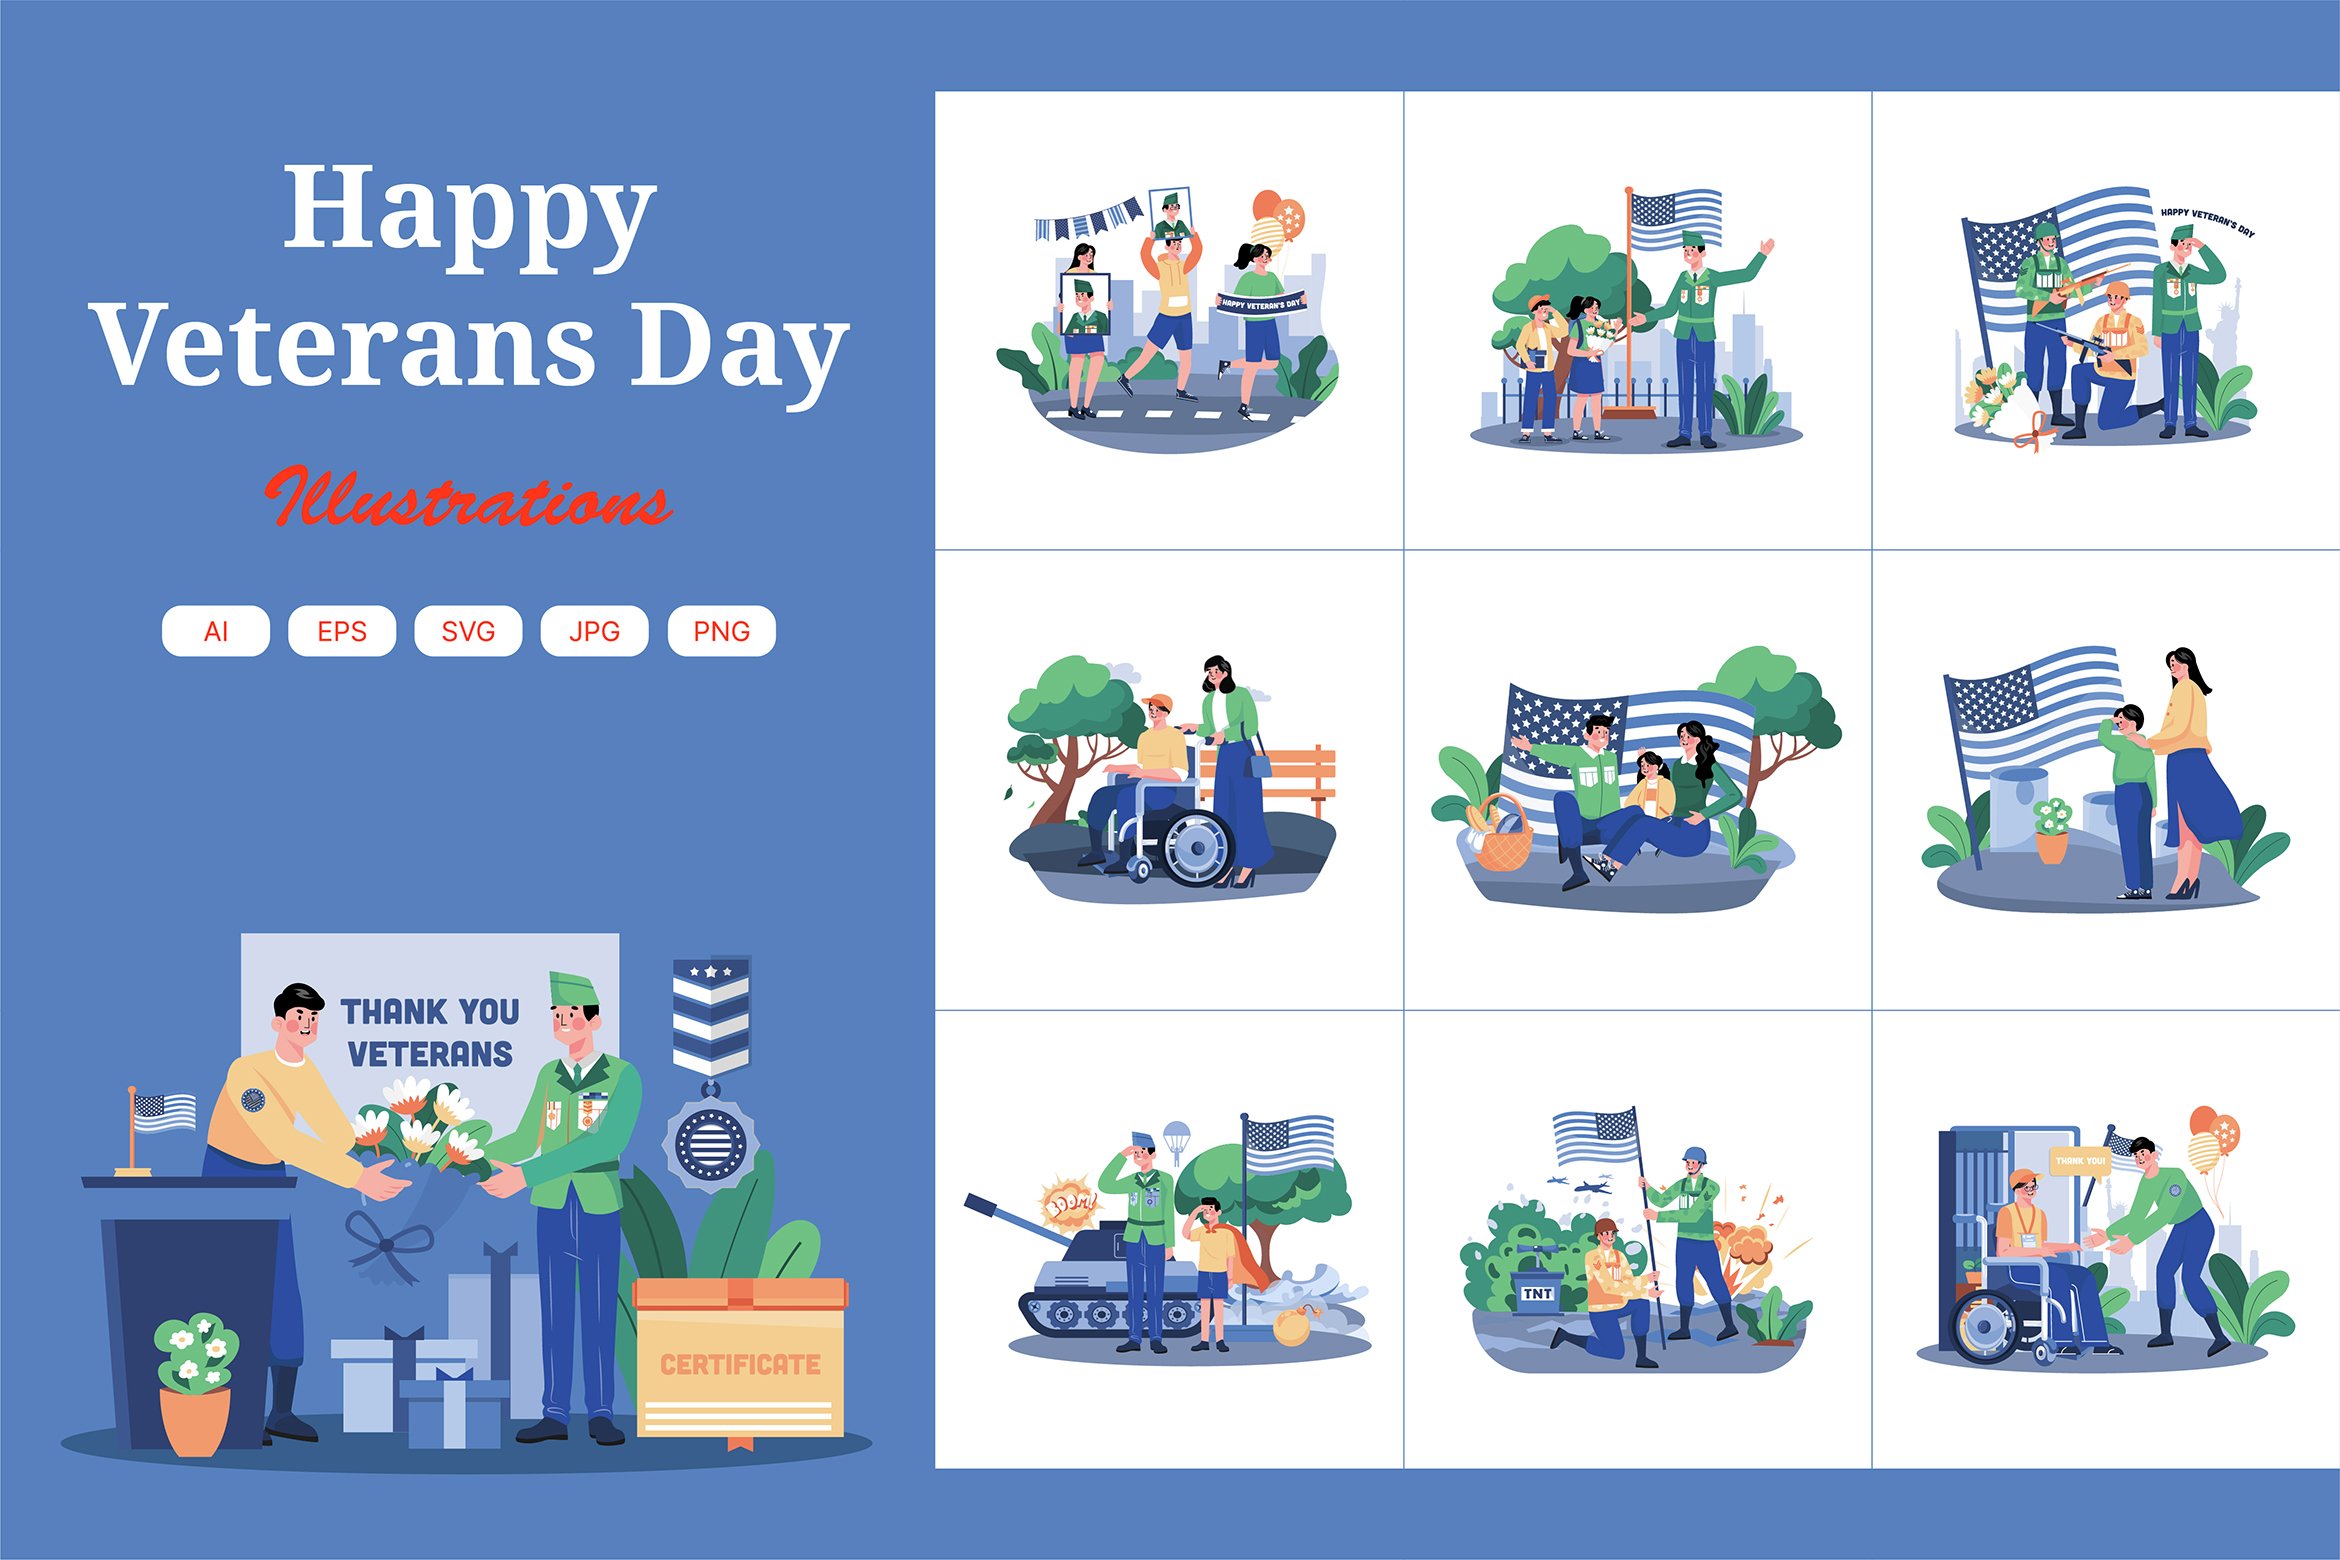 M665_Happy Veterans Day cover image.